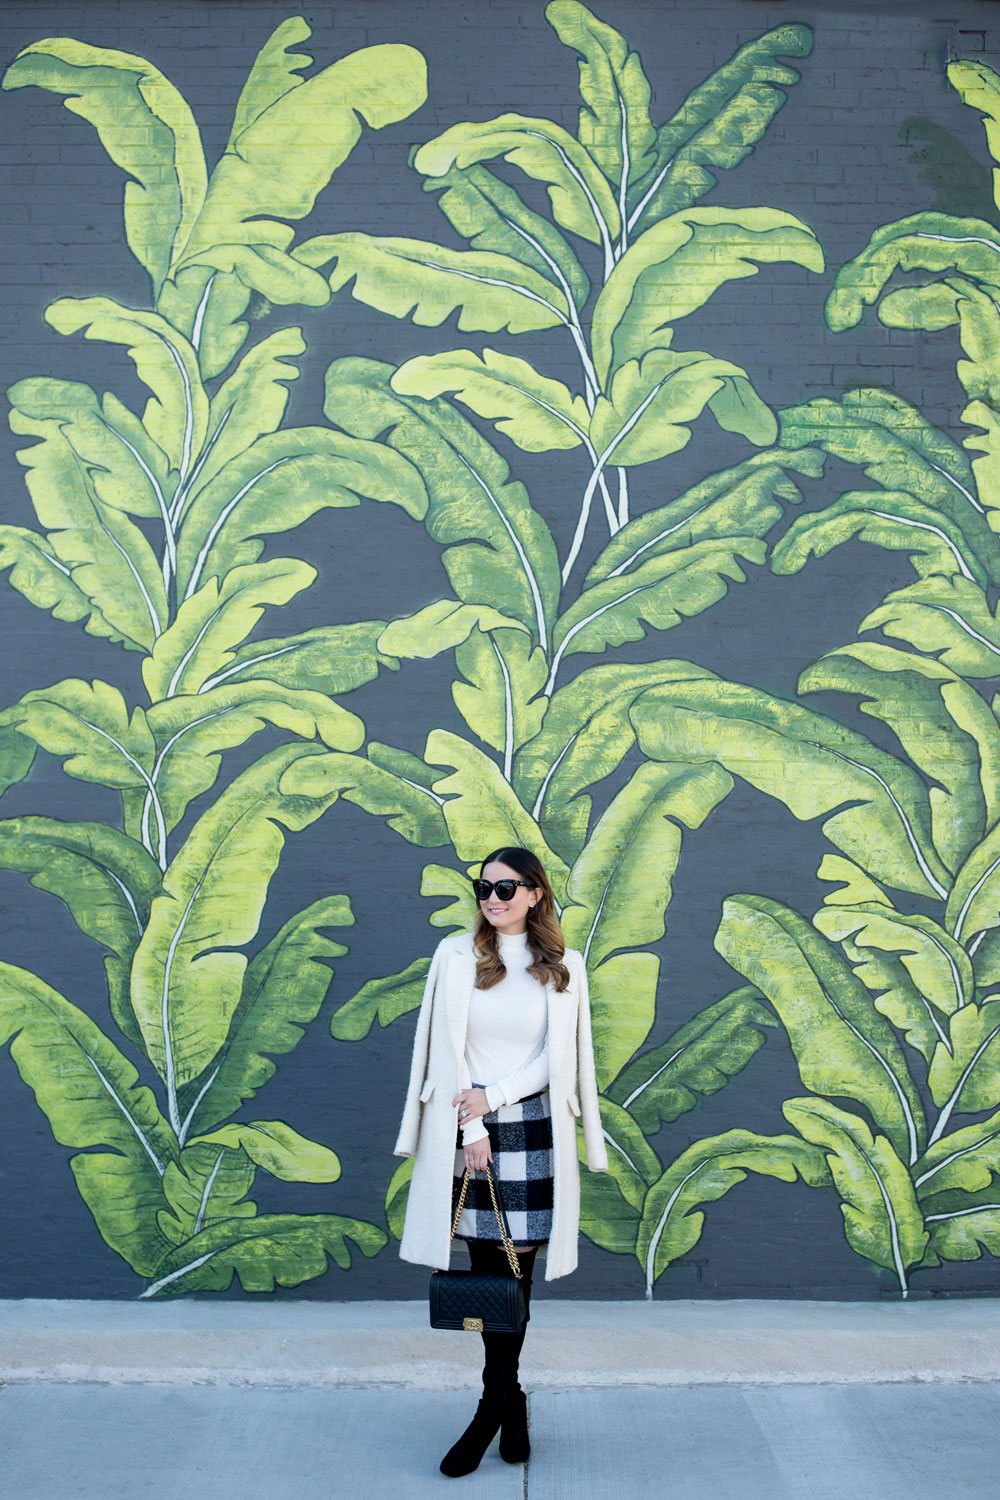 Jennifer Lake Style Charade in an ASOS black white check skirt, ivory coat, Chanel Boy Bag, and Stuart Weitzman Highland boots at a Chicago palm leaf mural